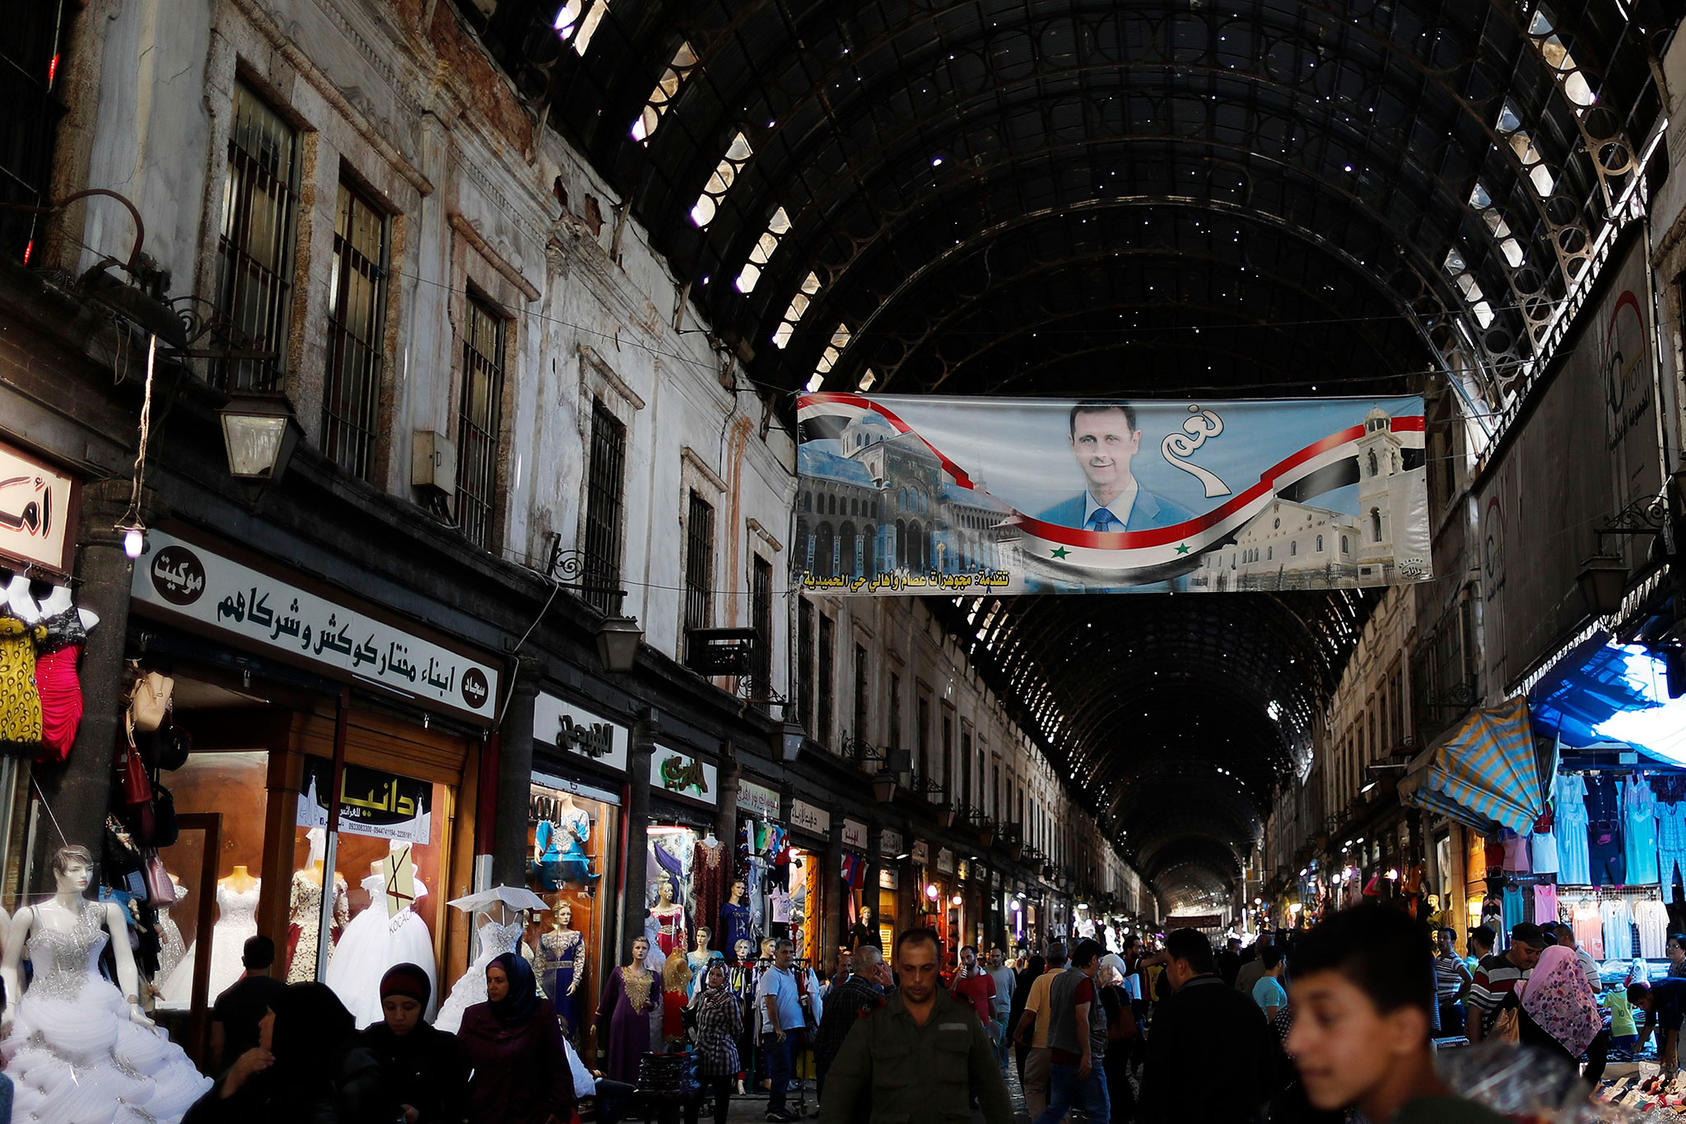 A poster of President Bashar al-Assad with “Yes” in Arabic hangs in the Hamadiyah market in the Old City of Damascus. (Photo by Hassan Ammar/AP/ Shutterstock.)